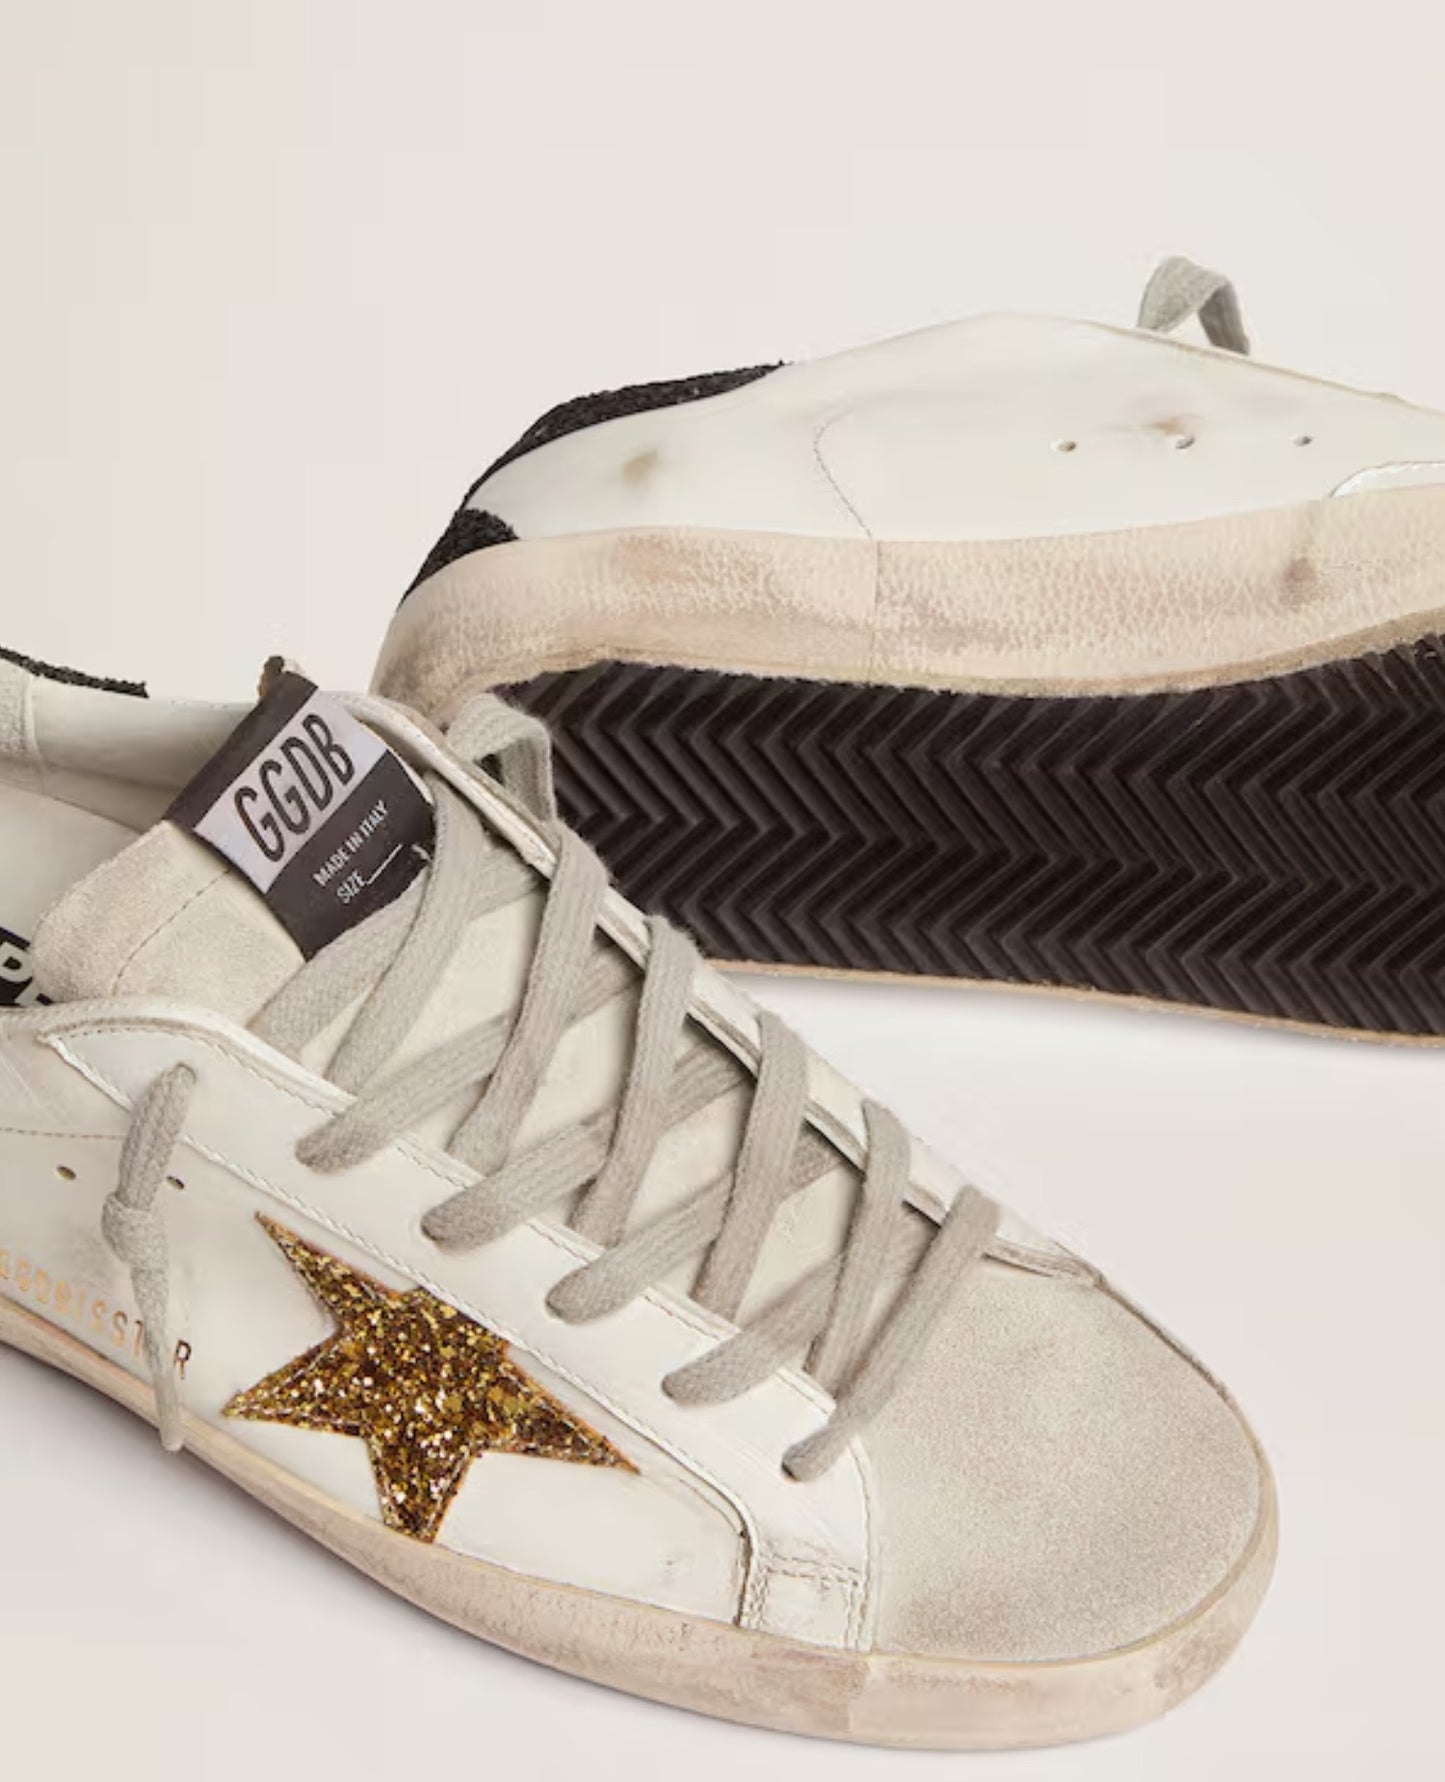 Golden Goose
Women's Super-Star with gold star and black glitter heel tab